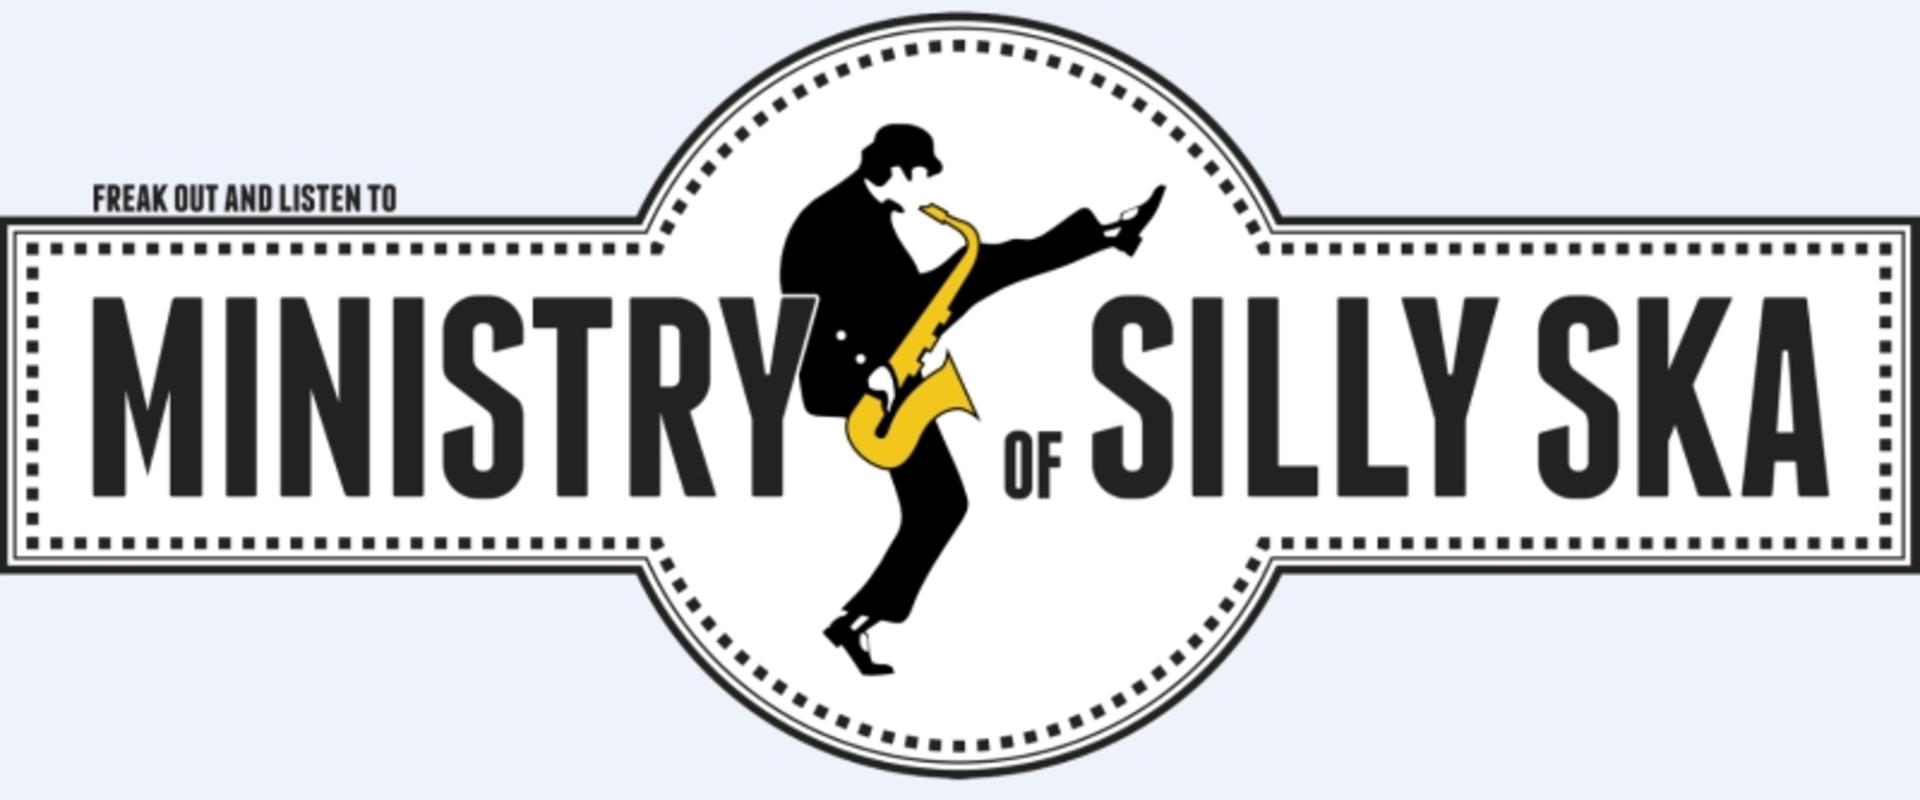 Band: Ministry of Silly Ska